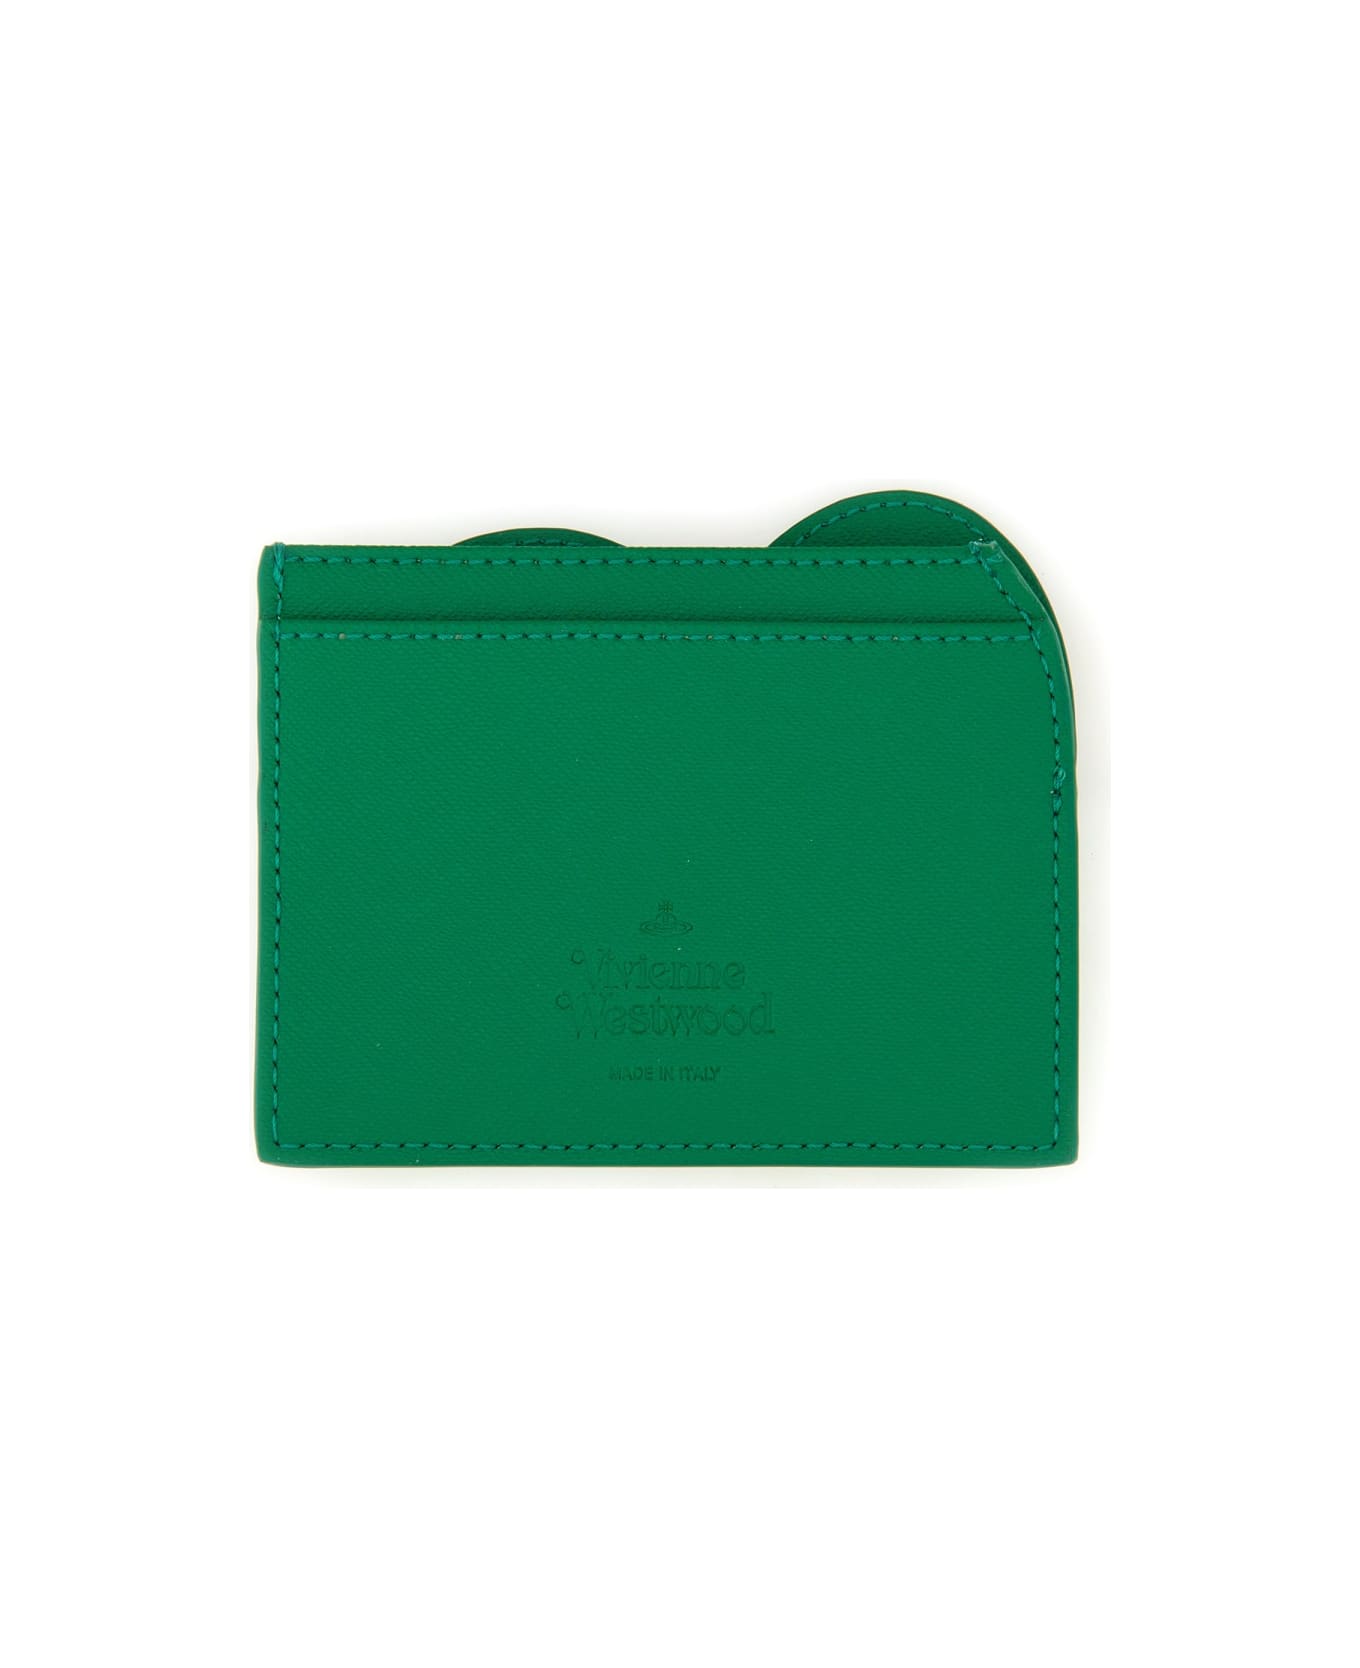 Vivienne Westwood Card Holder With Orb Embroidery - GREEN